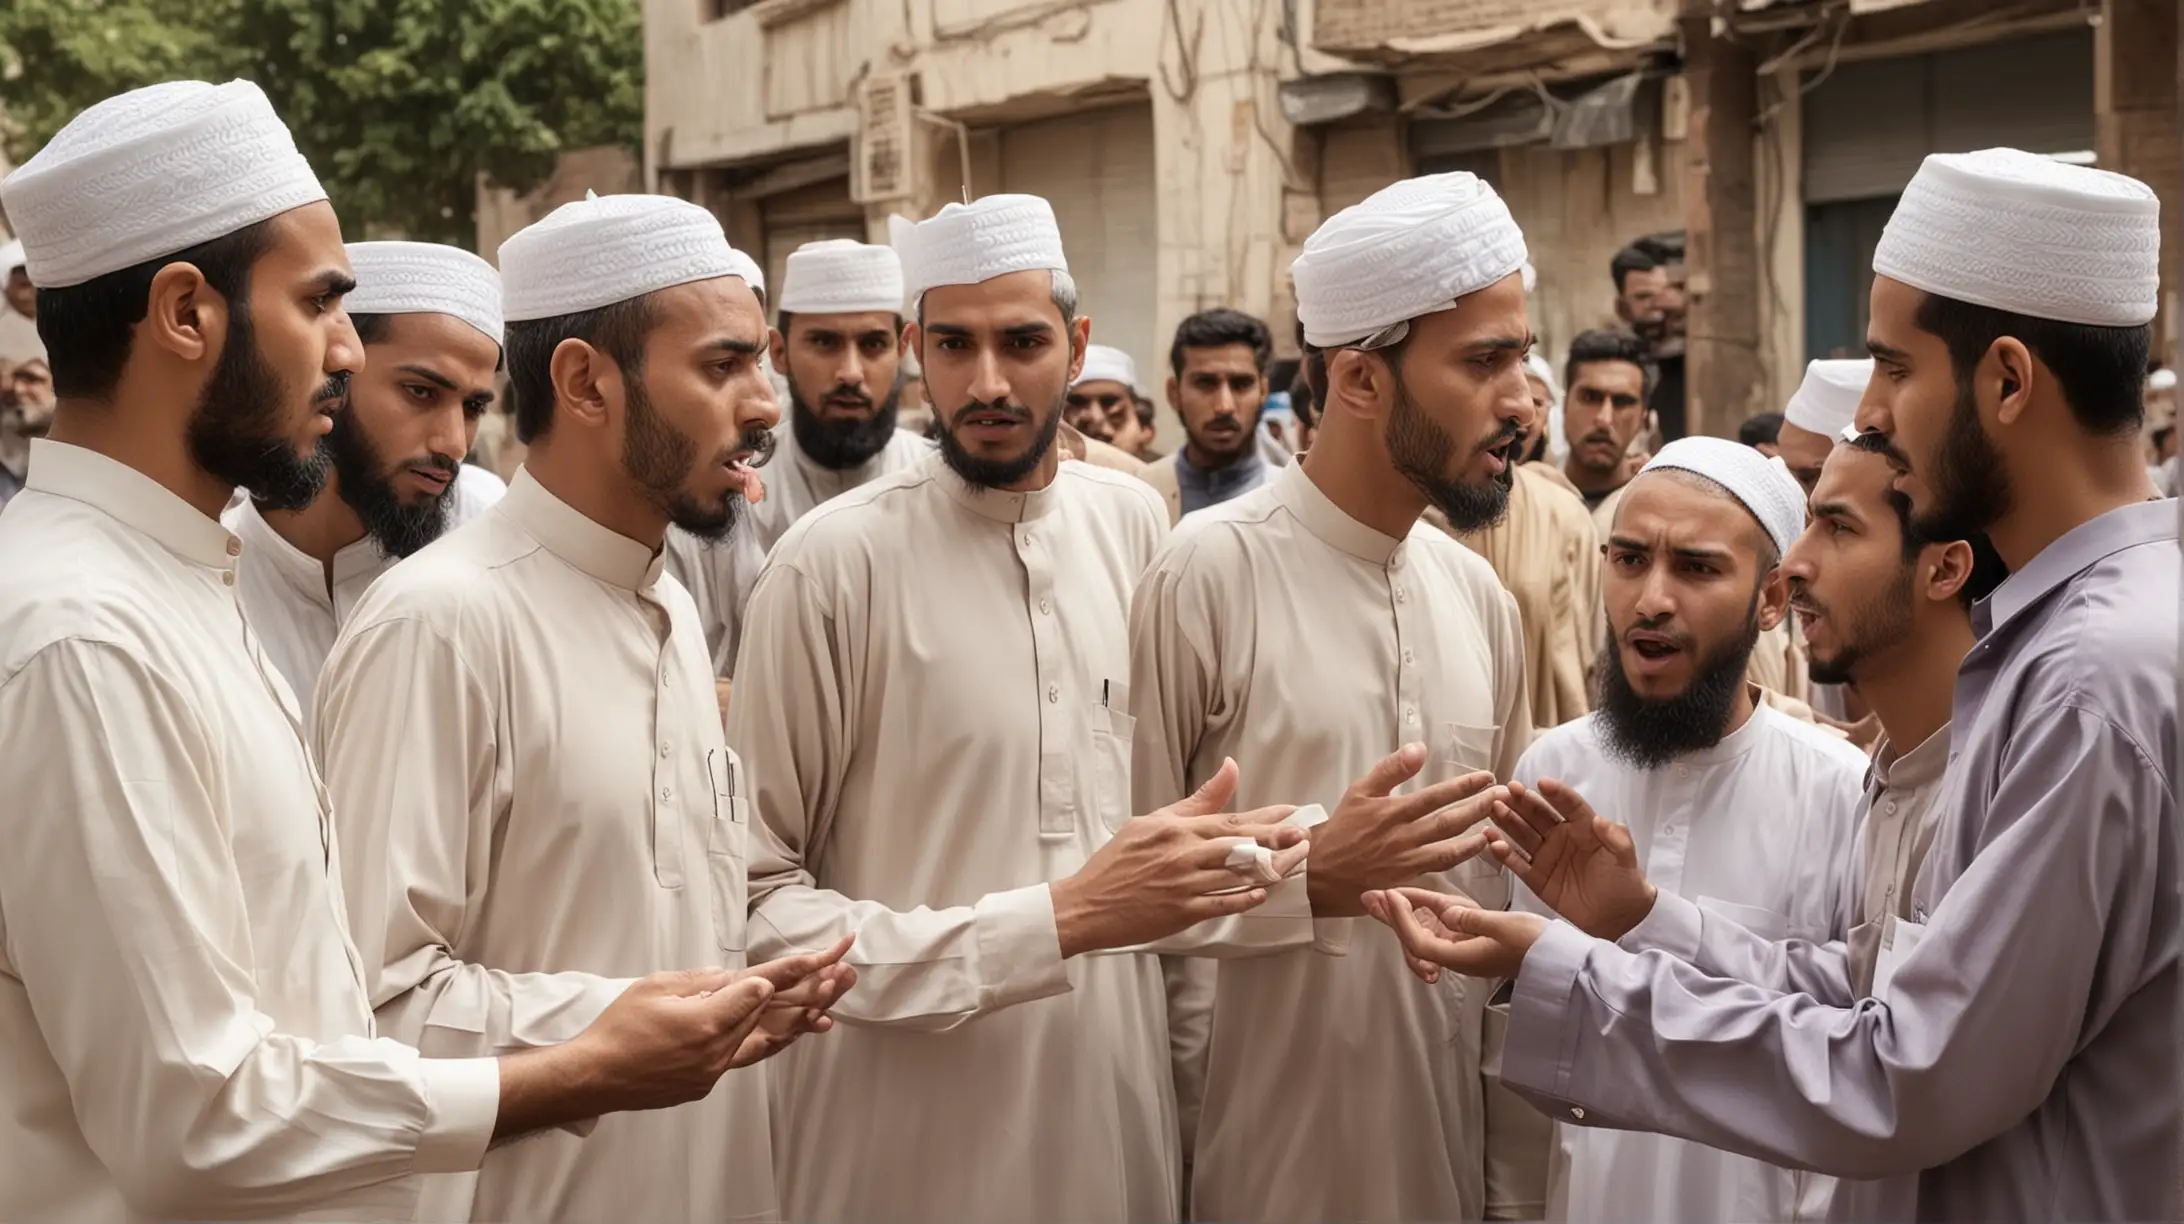 Intense Discussion Elder Muslim Man Engages Younger Men in Serious Conversation